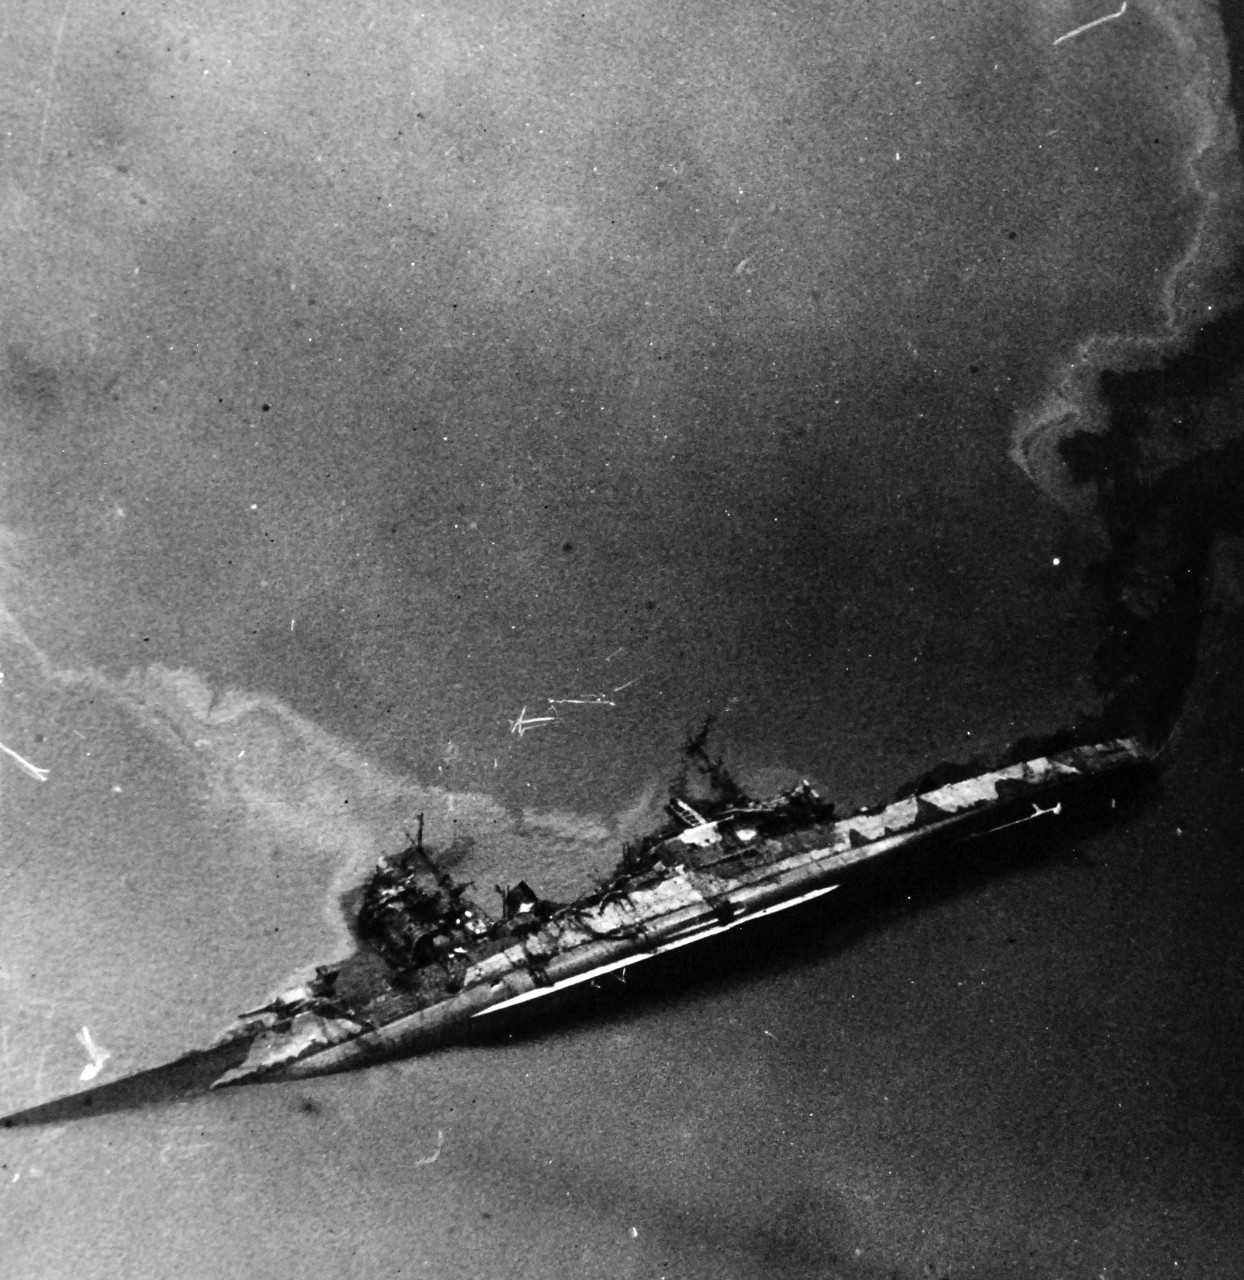 80-G-490228:  Raids on Japanese Home Islands, July 28, 1945.  Japanese cruiser Oyoda after attack by American and British carrier planes in Kure Bay, Japan, July 28, 1945.  U.S. Navy Photograph, now in the collections of the National Archives. (2015/12/08).